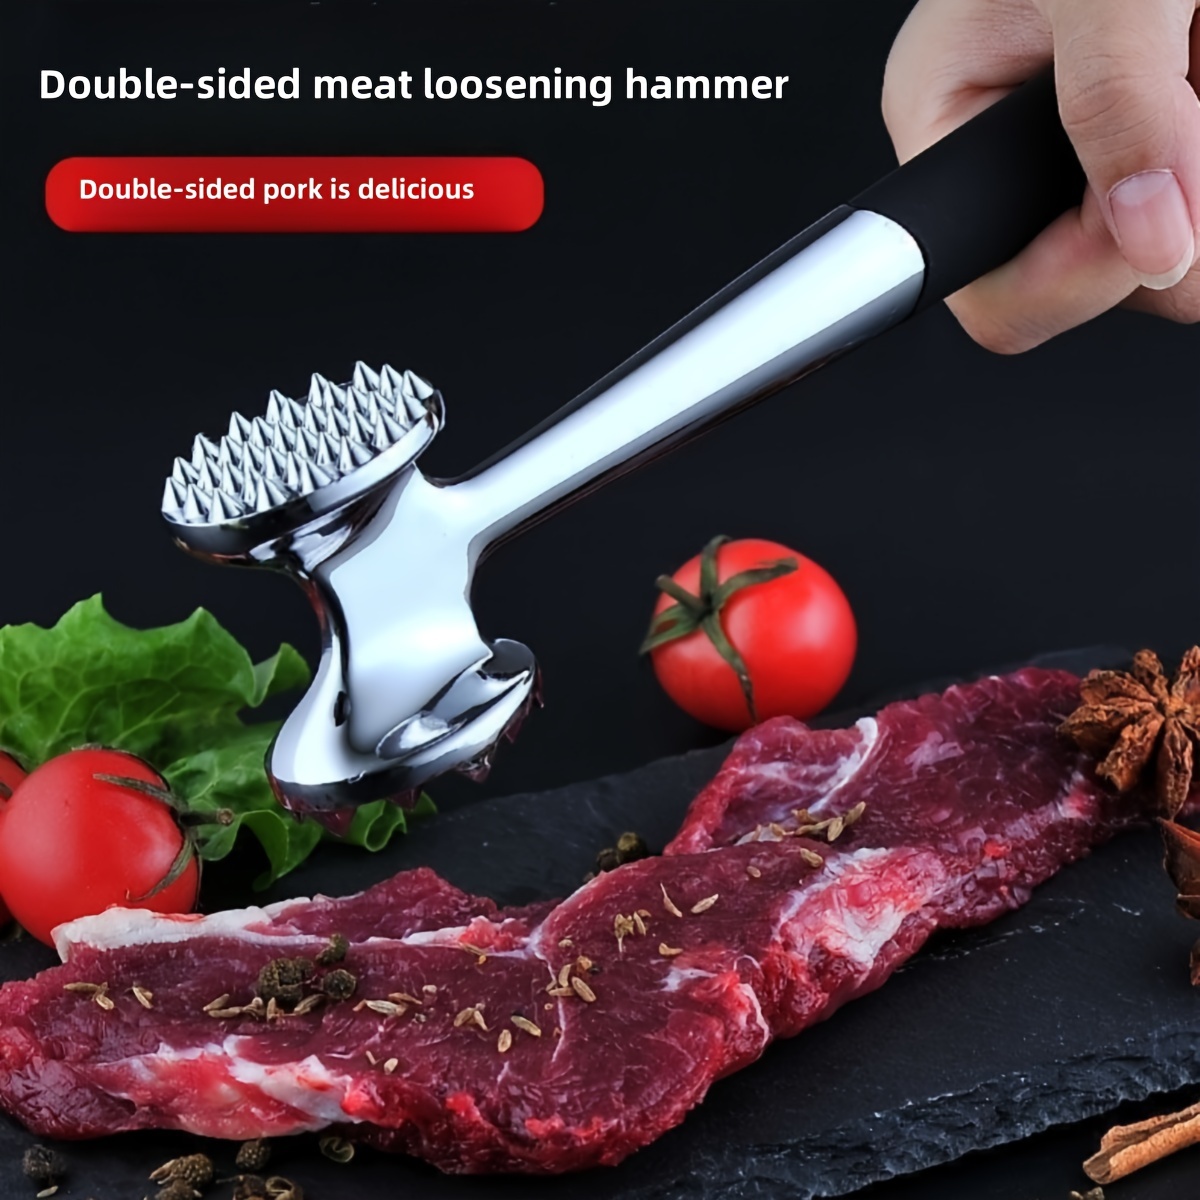 

High-quality Stainless Steel Meat Tenderizer Hammer - Double-sided Kitchen Tool For Tenderizing Steak & Rolled Meats, Durable Metal Kitchen Accessory, 1pc